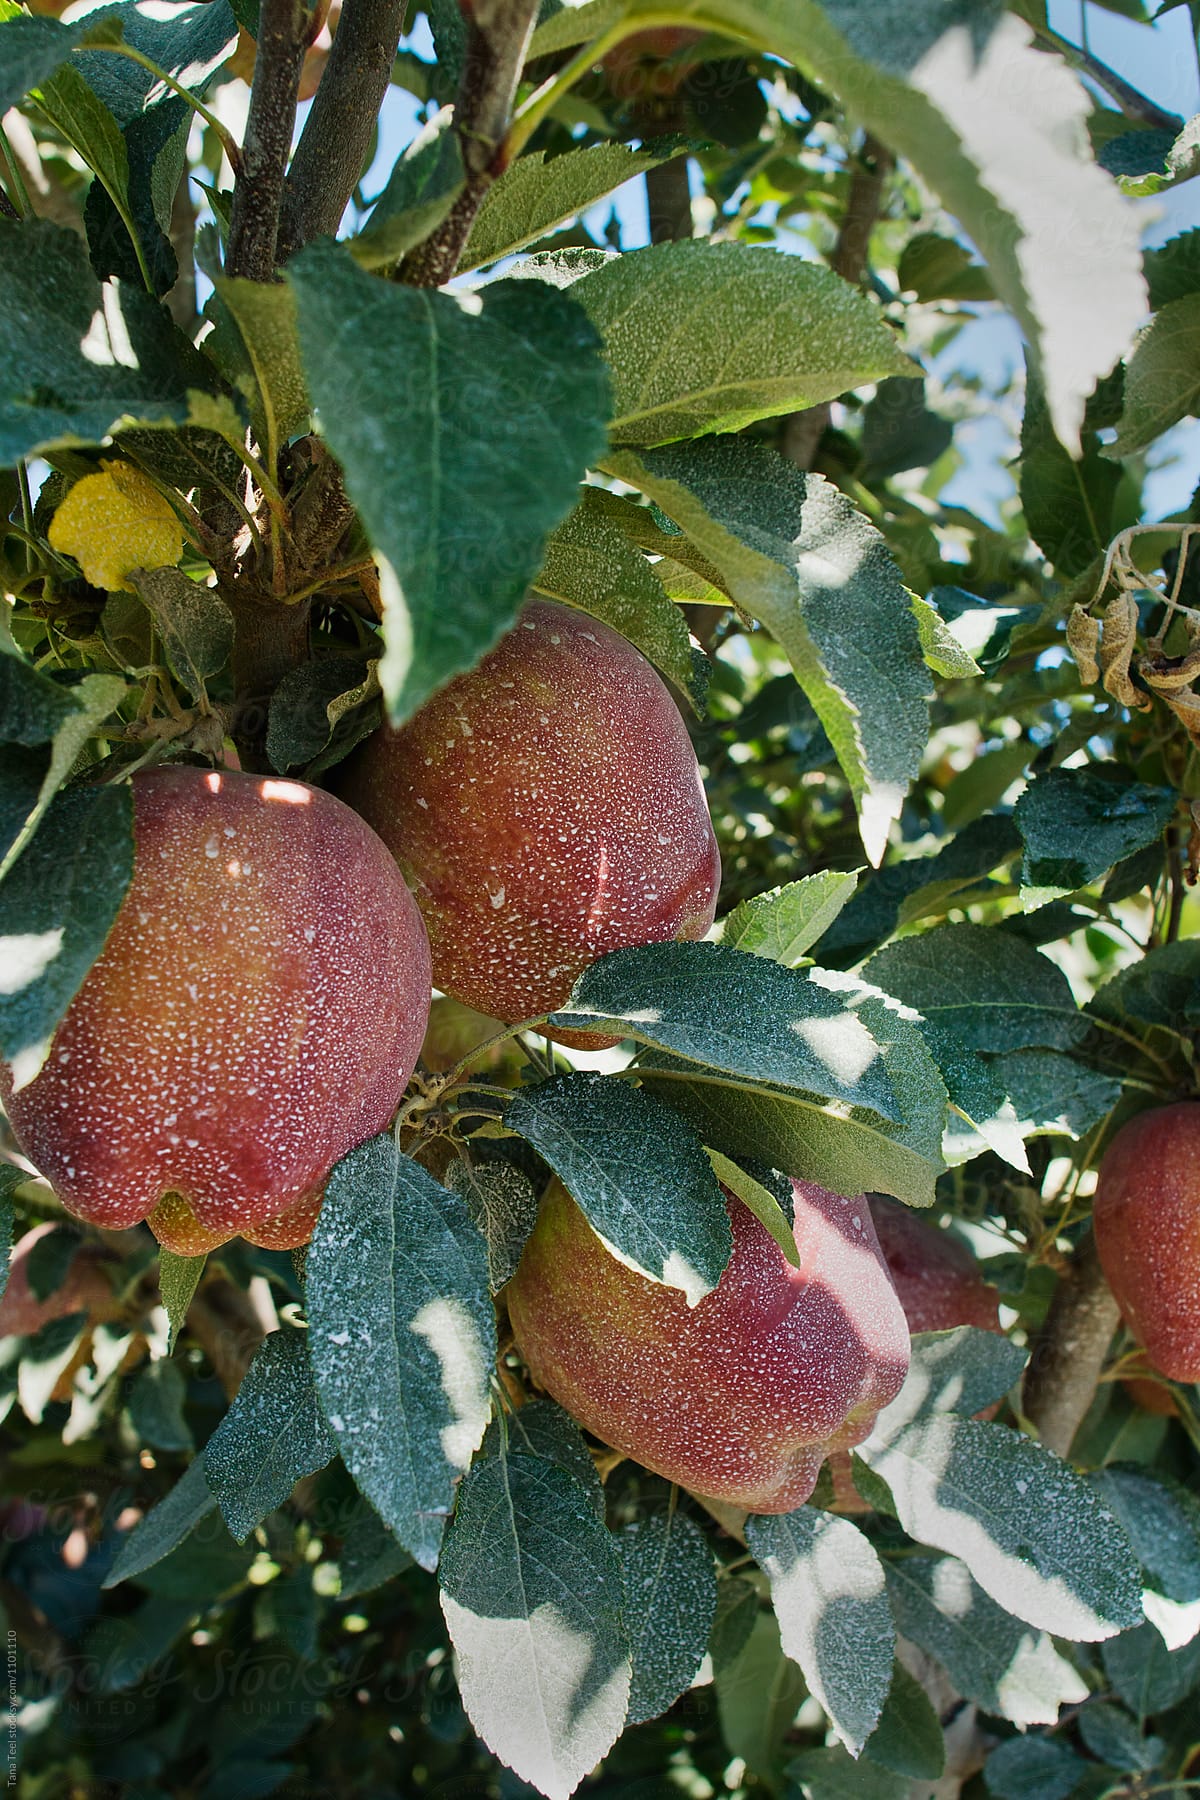 cluster of ripe apples on tree branch